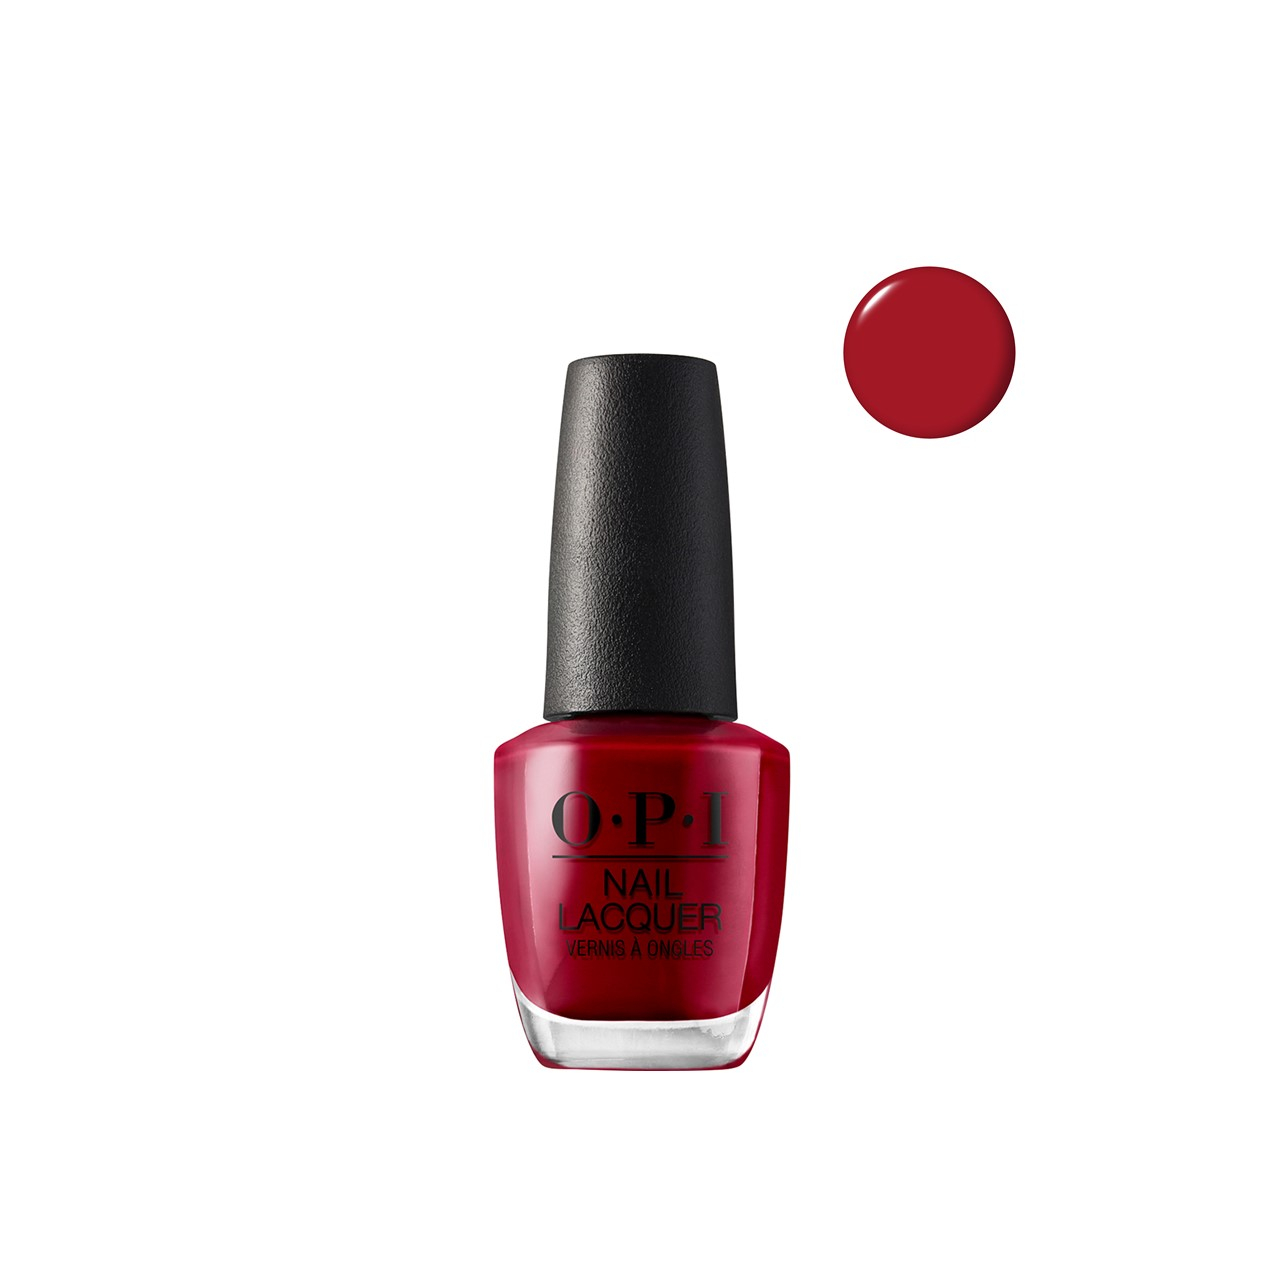 https://static.beautytocare.com/media/catalog/product/o/p/opi-nail-lacquer-amore-at-the-grand-canal-15ml.jpg